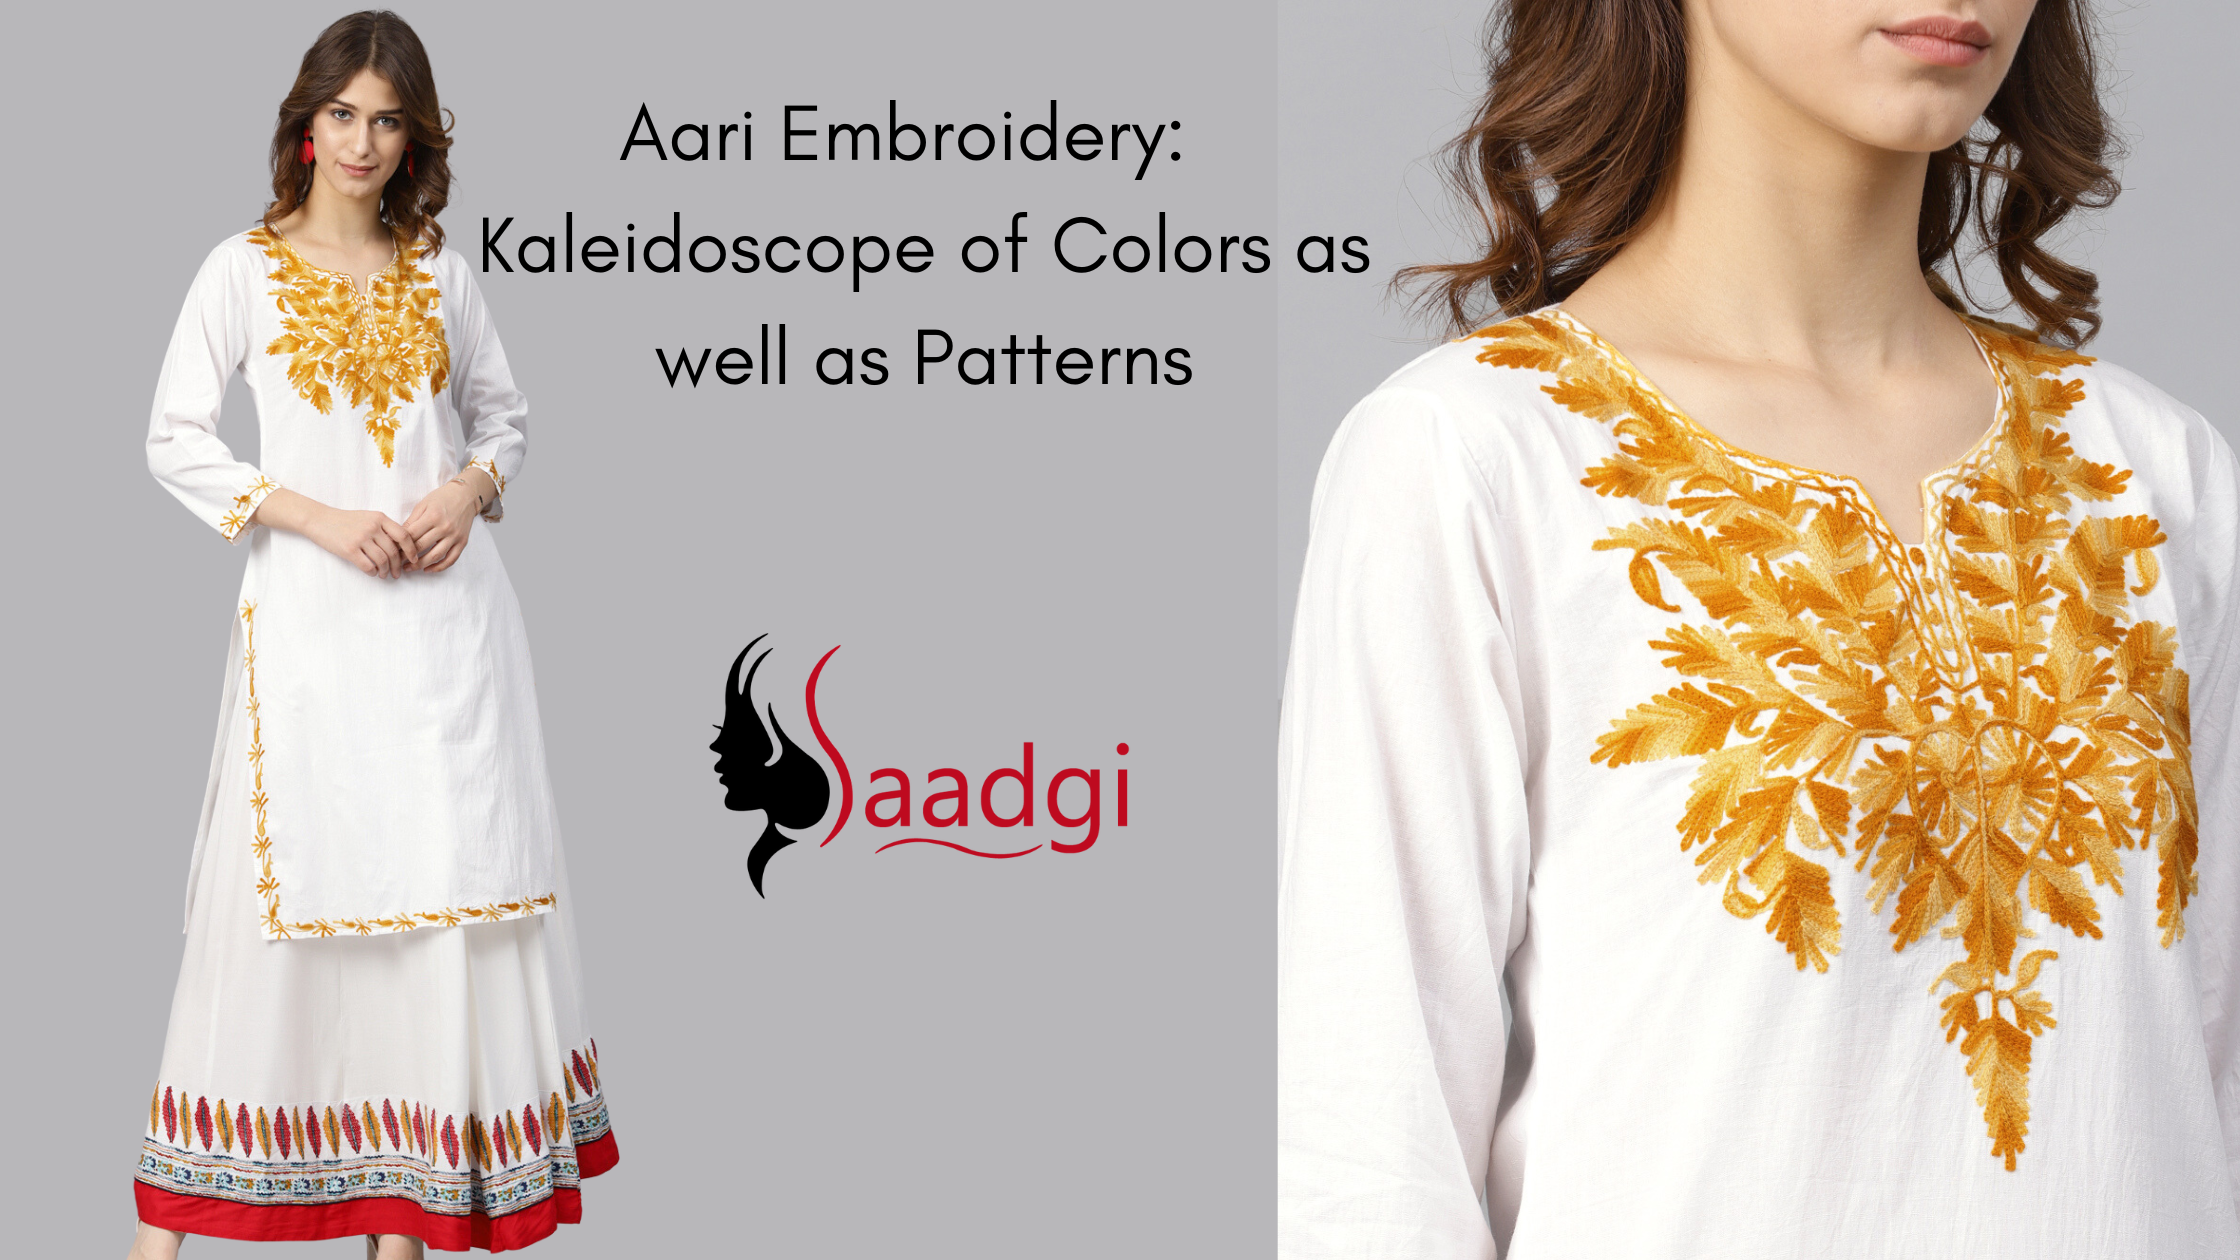 Aari Embroidery:  Kaleidoscope of Colors as well as Patterns